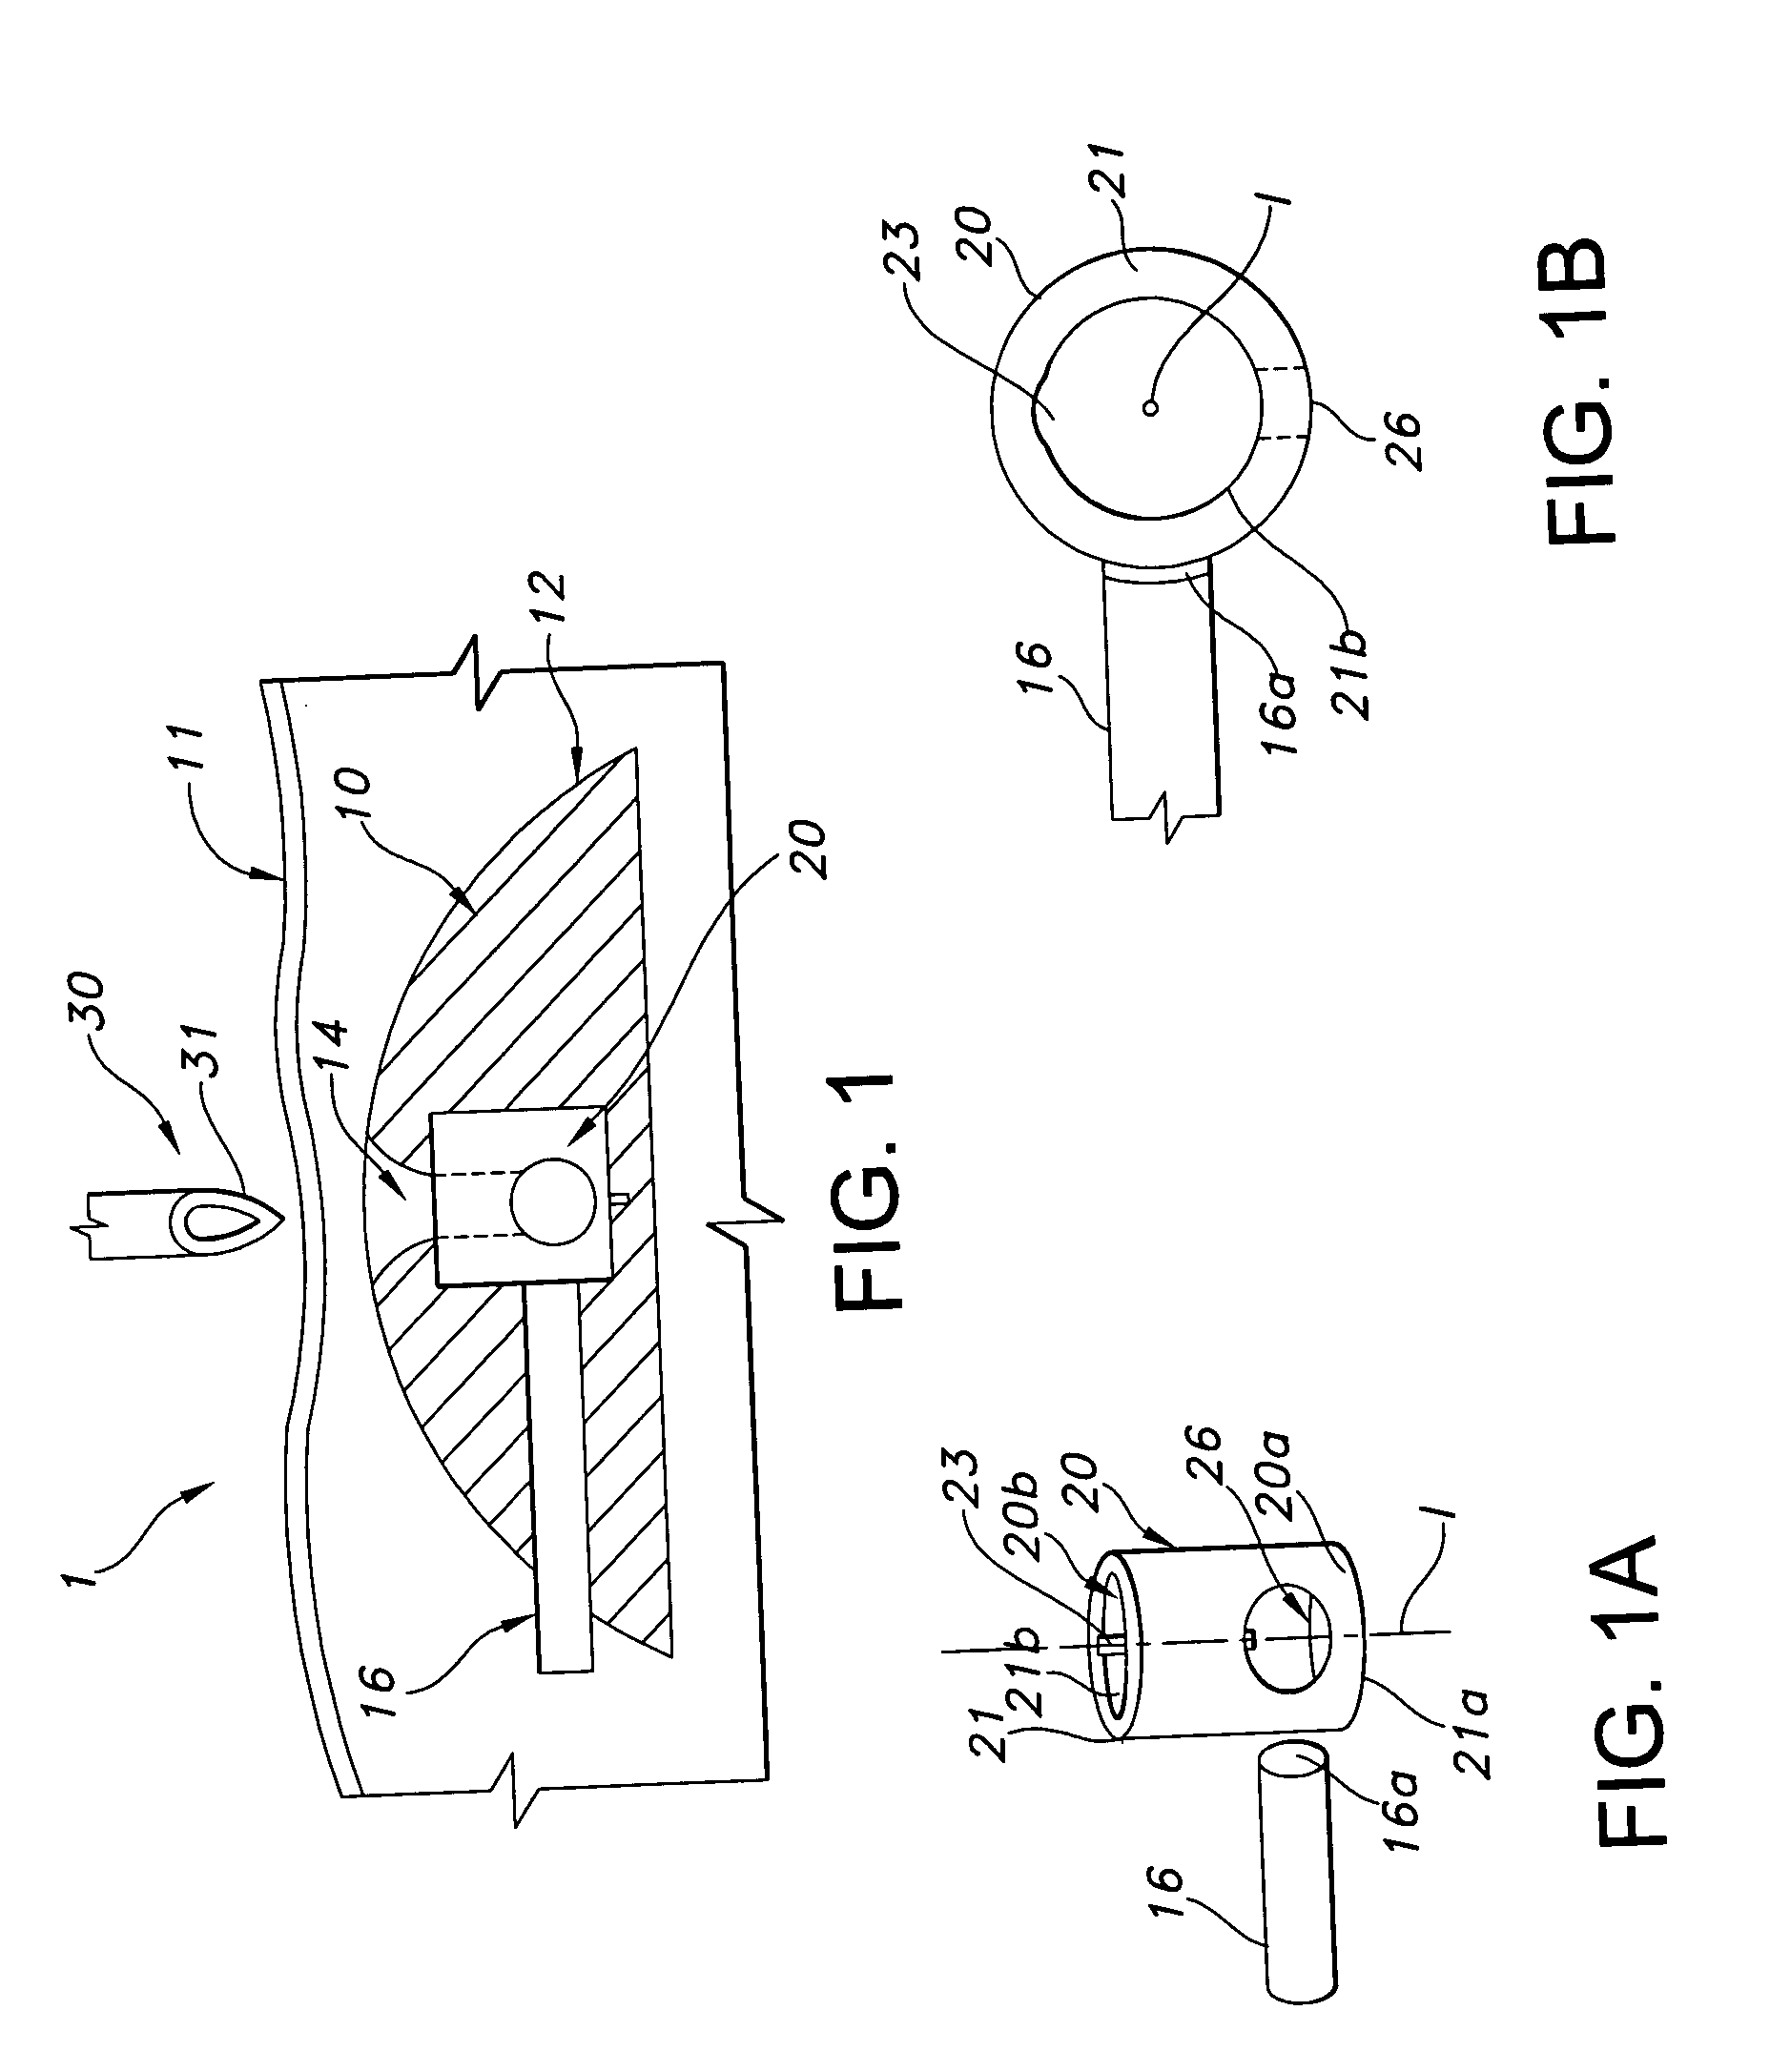 Valve port assembly with coincident engagement member for fluid transfer procedures